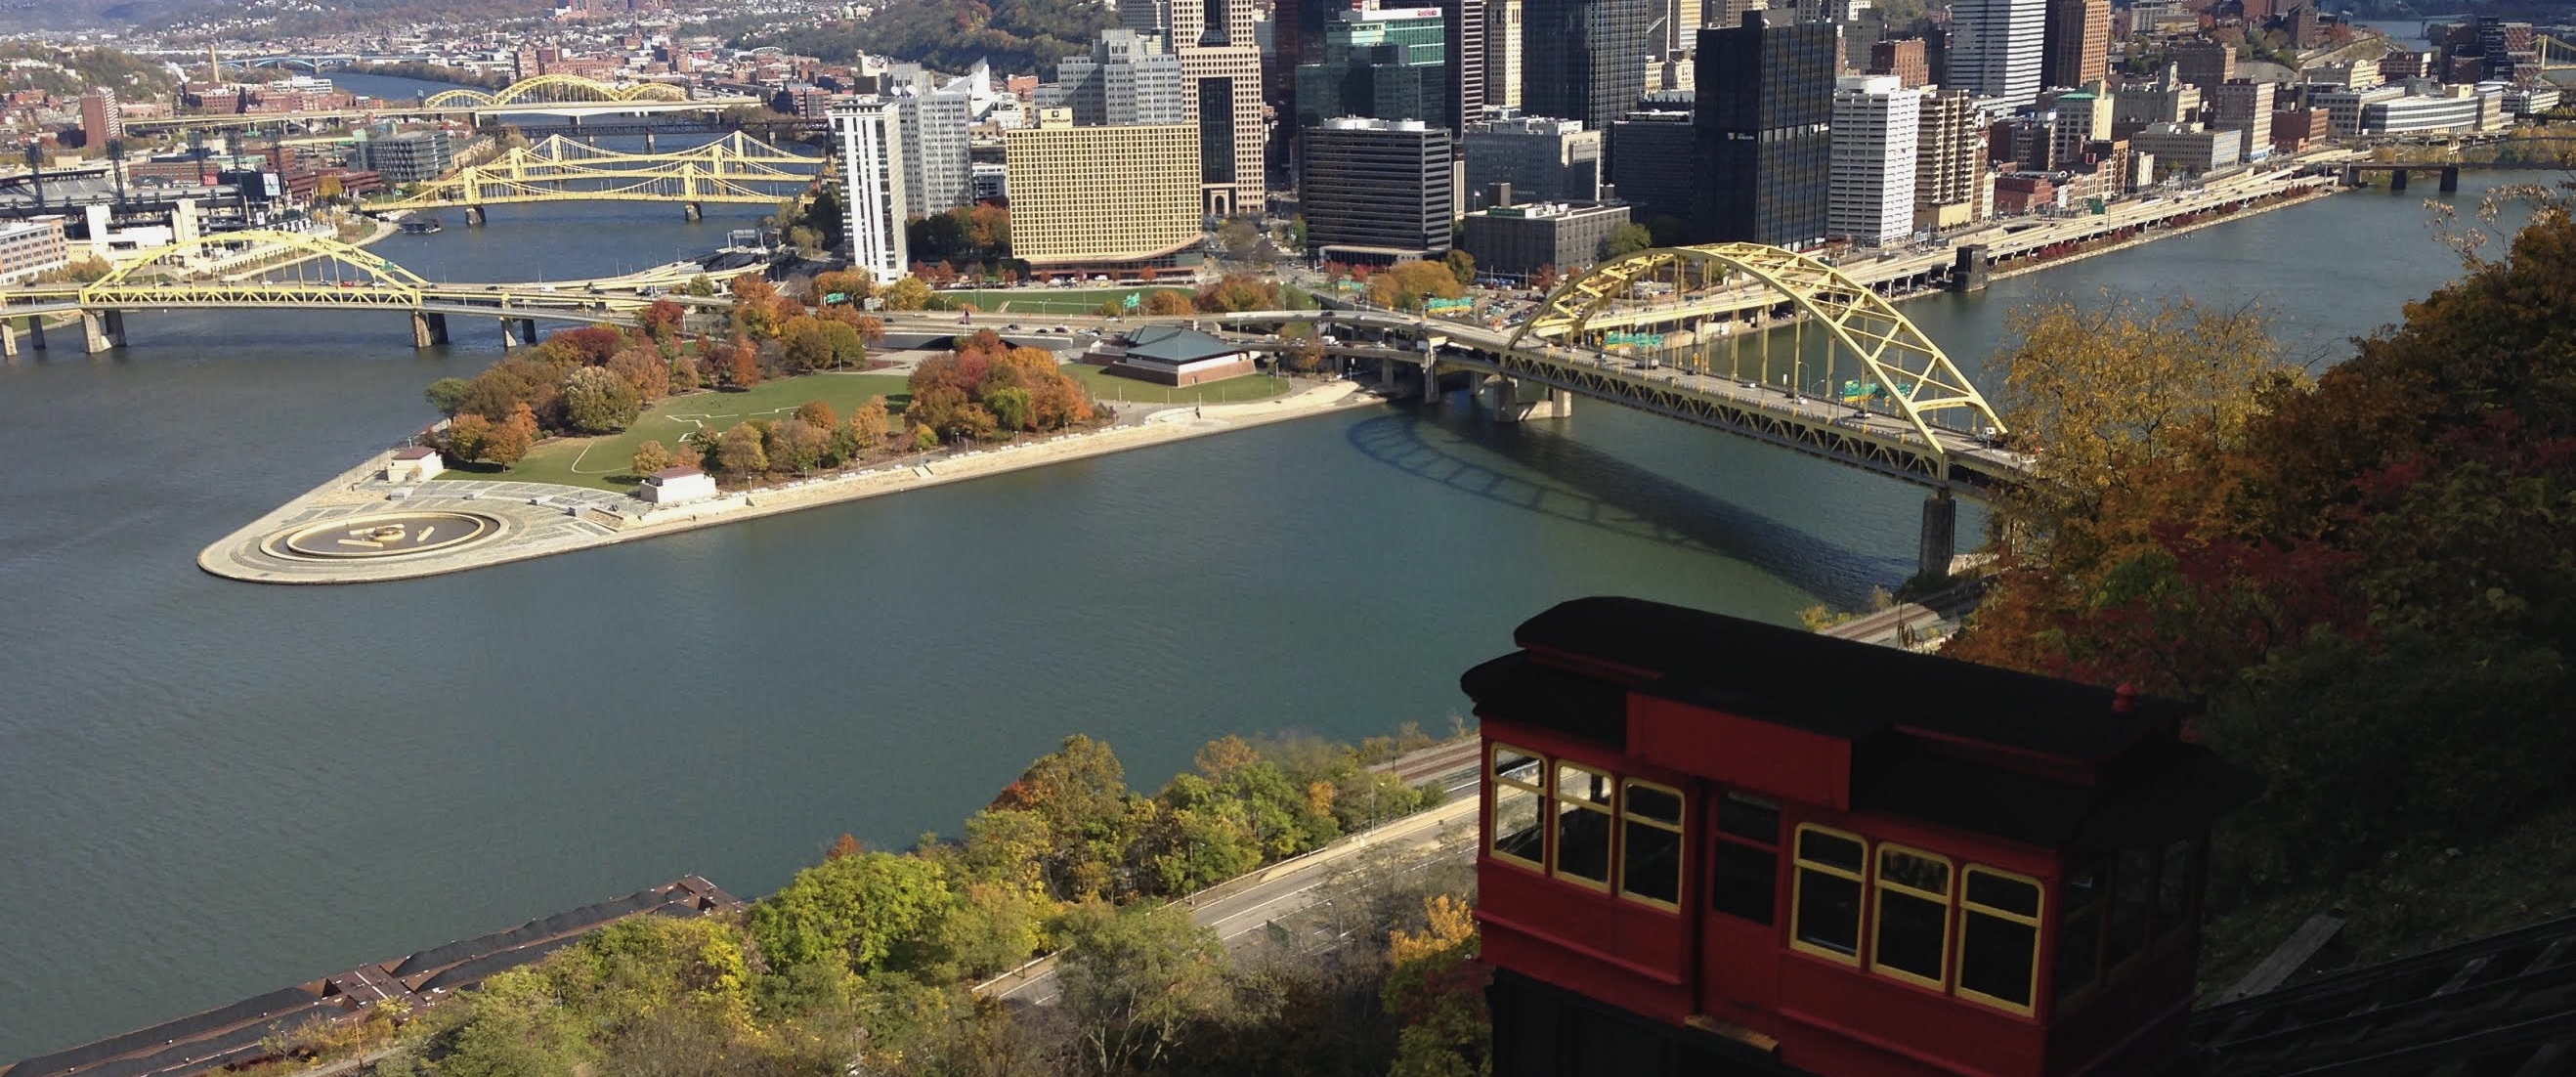 Pittsburgh’s Duquesne Incline